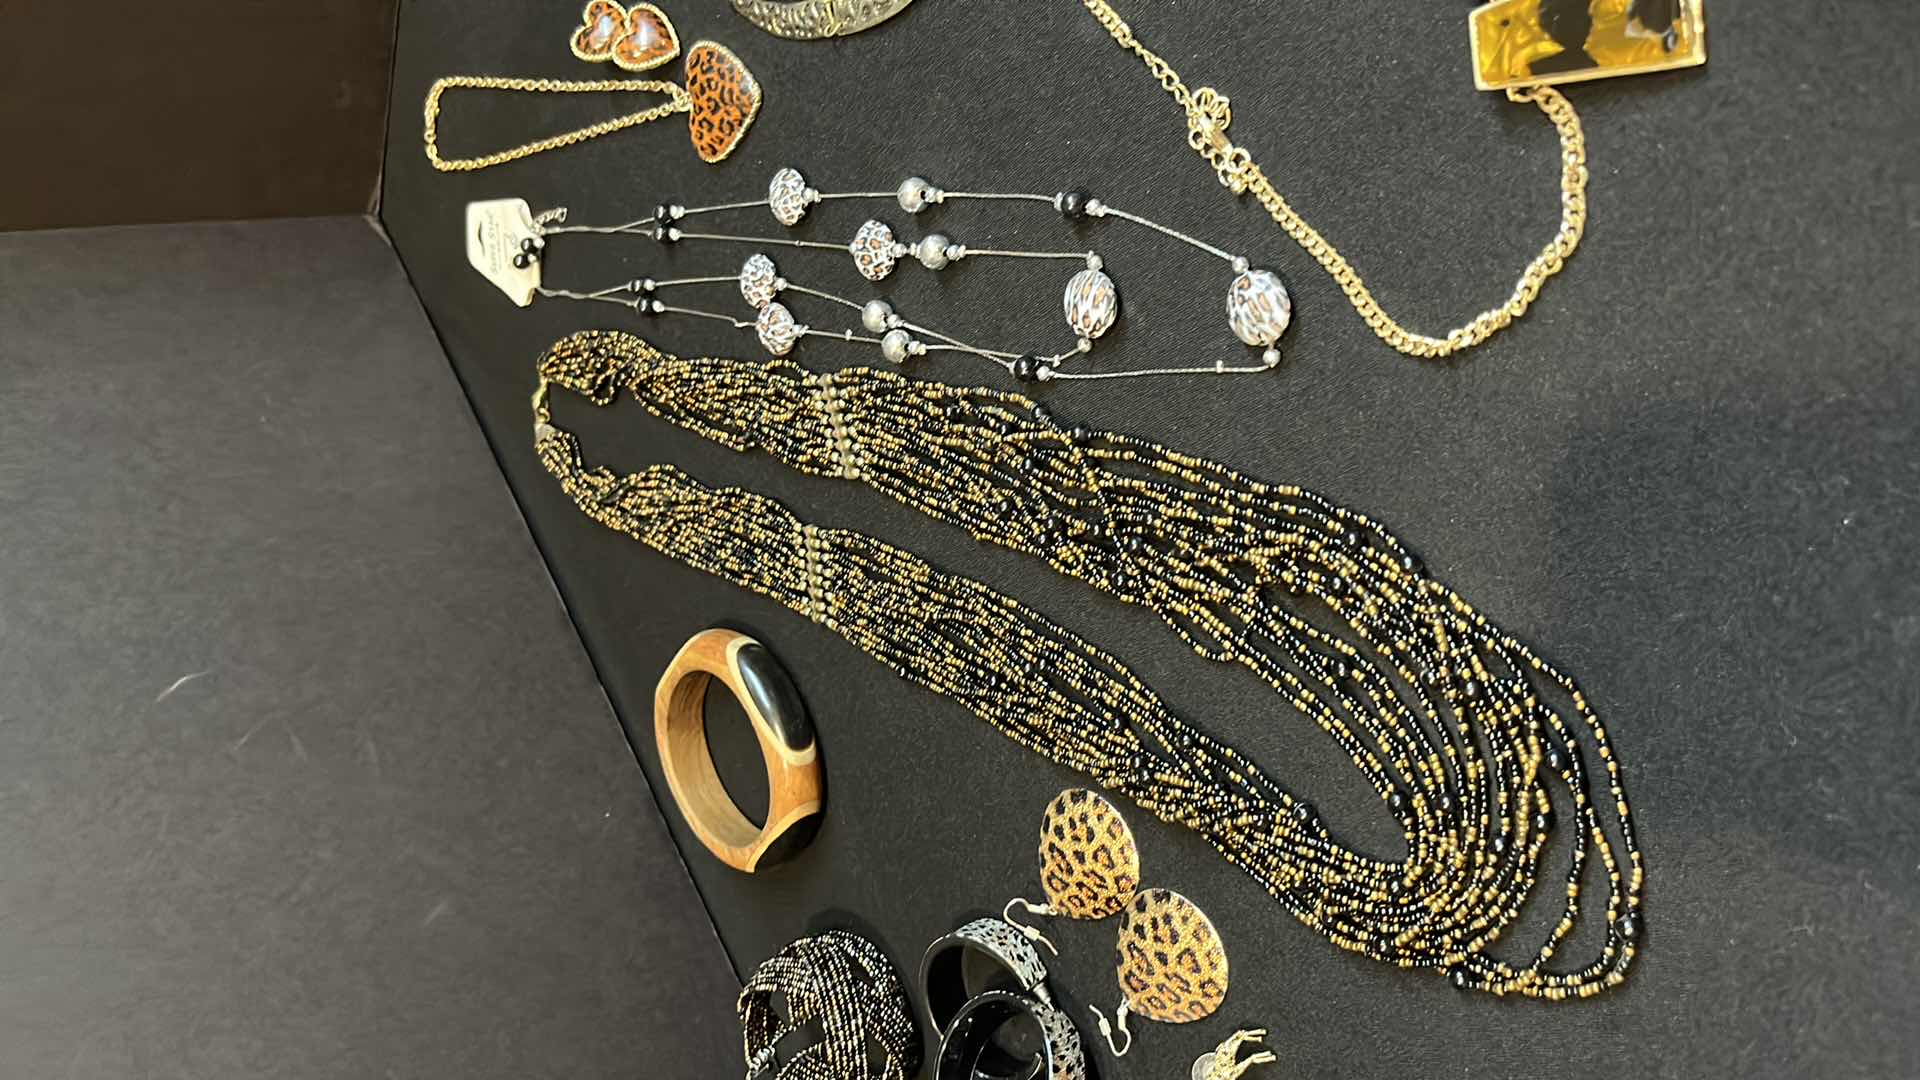 Photo 5 of LEOPARD THEMED COSTUME JEWELRY AND HANGING JEWELRY ORGANIZER